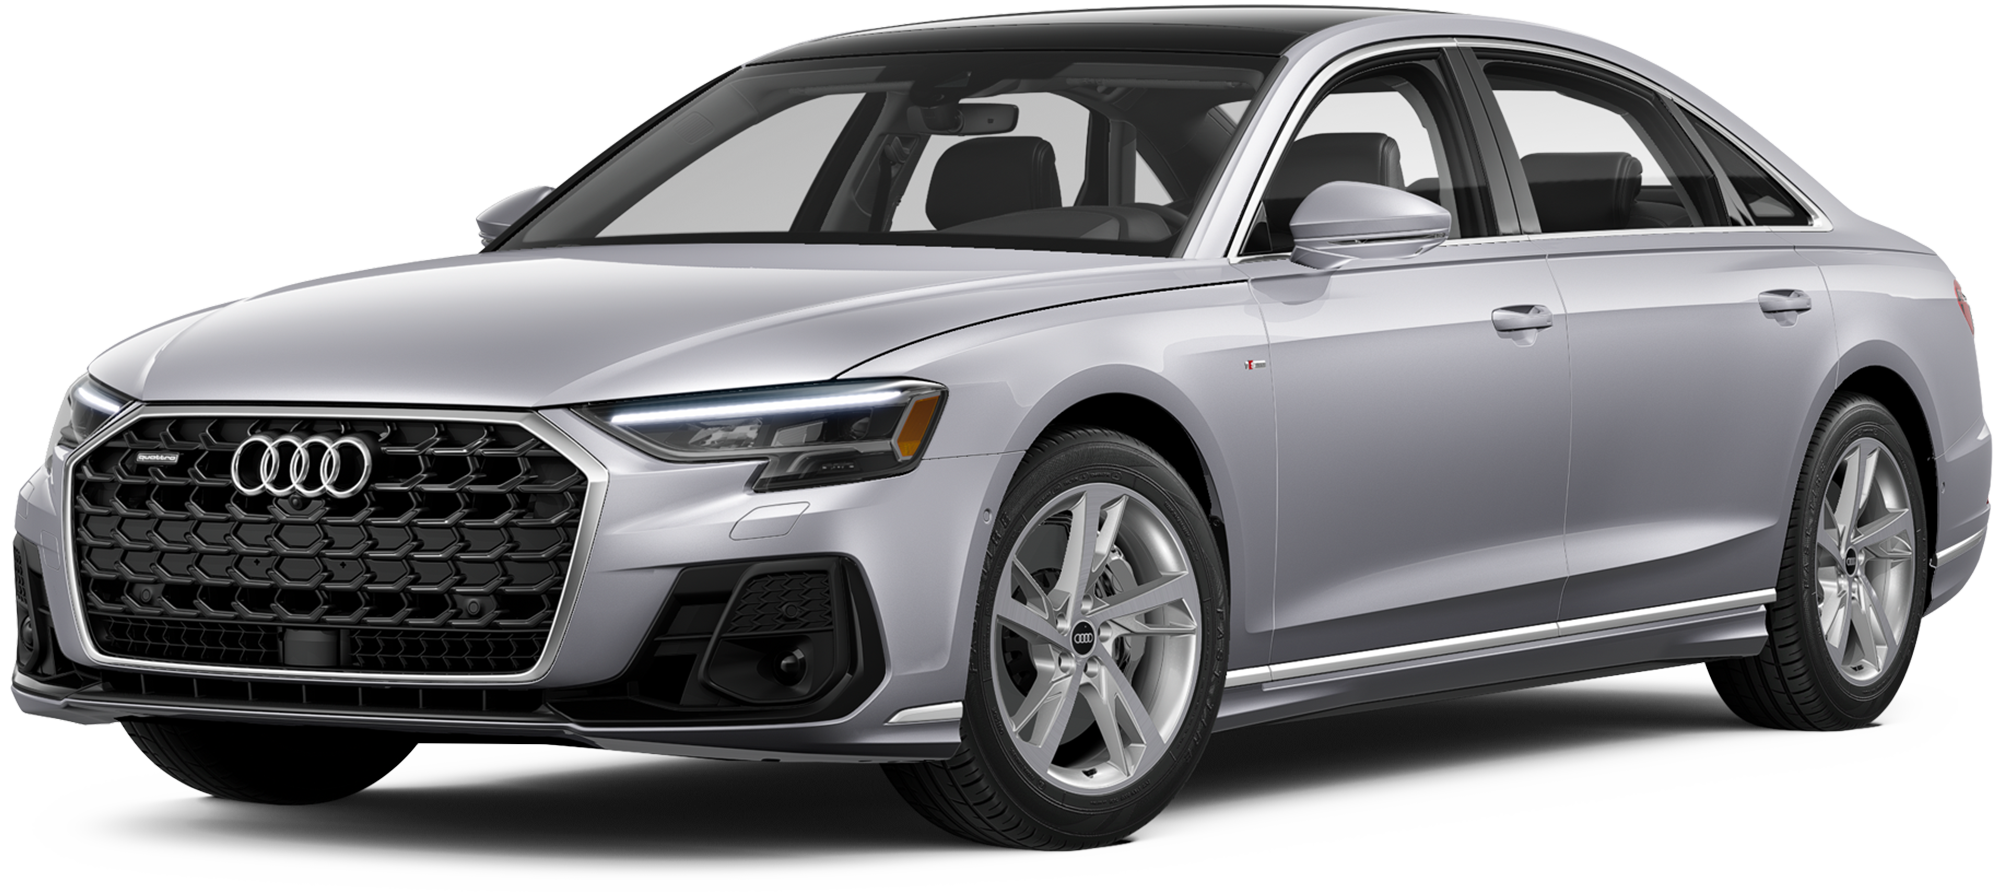 Audi Incentives, Rebates, Specials in , Audi Finance and Lease Deals